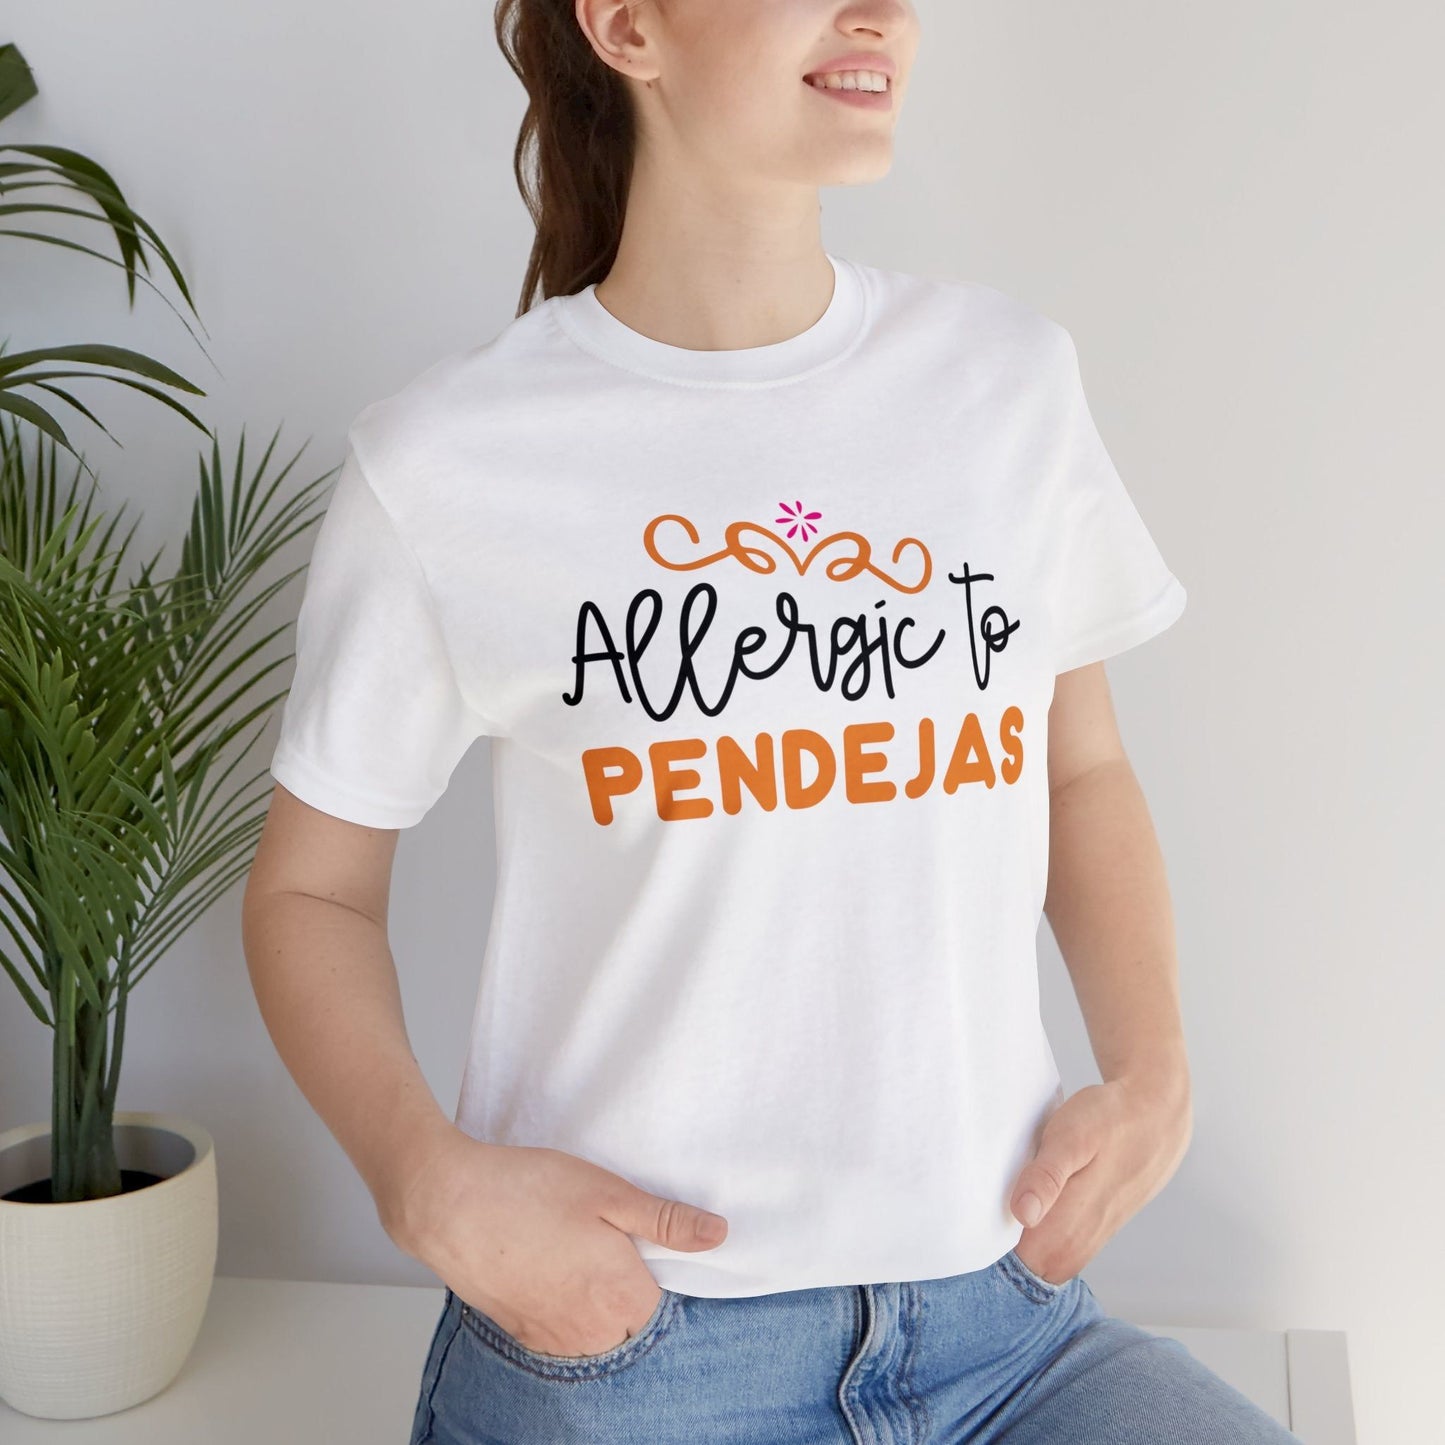 T-shirt - Allergic to Pendejas